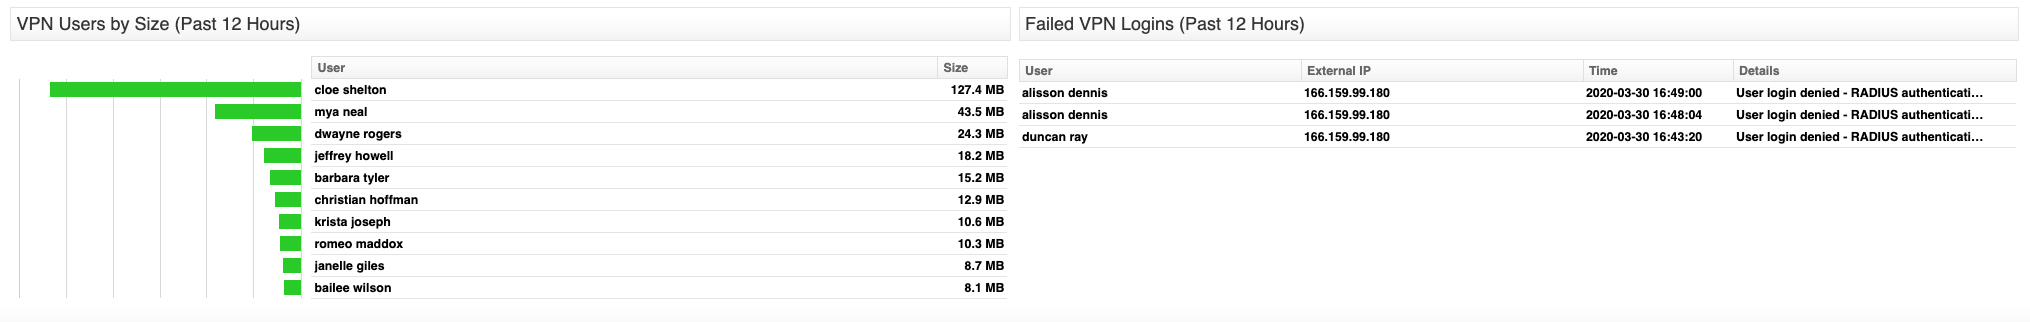 SonicWall VPN Users by Size and Failed Logins